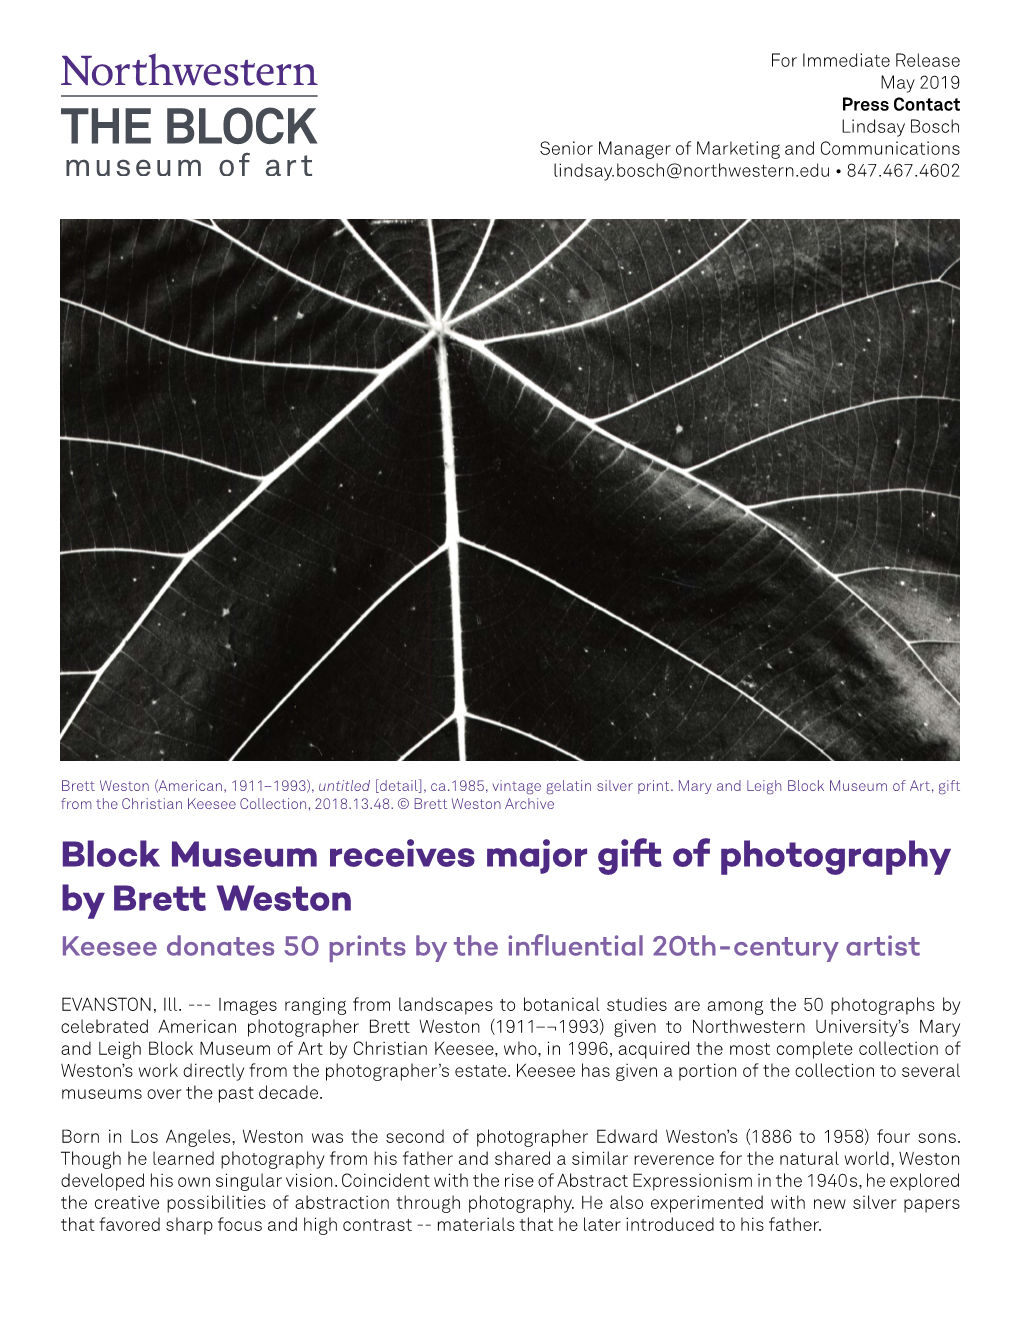 Block Museum Receives Major Gift of Photography by Brett Weston Keesee Donates 50 Prints by the Influential 20Th-Century Artist